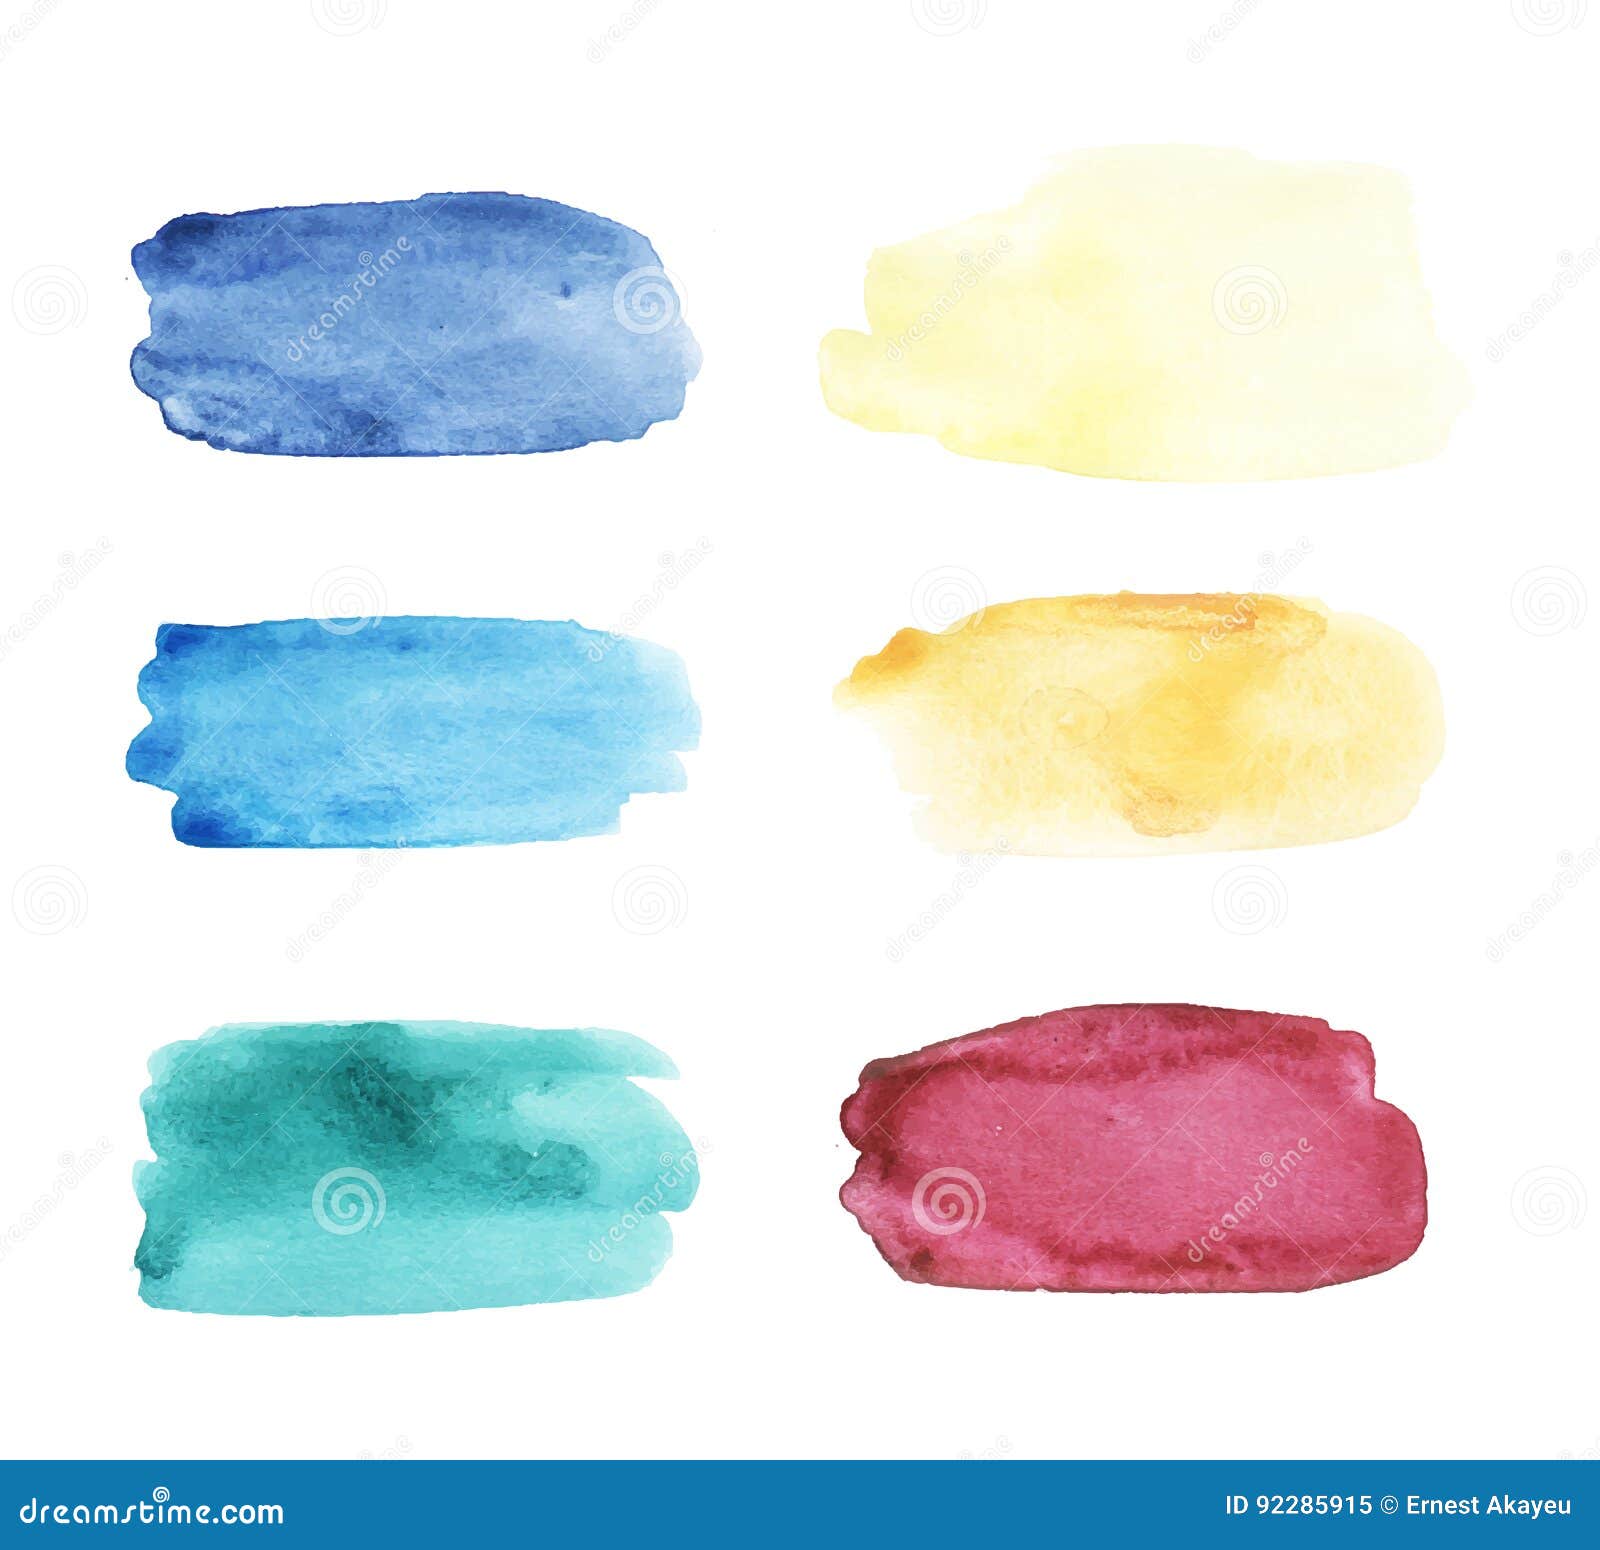 watercolor brushstrokes set. hand drawn  collection with colorful stains, spots, smears, horizontal .